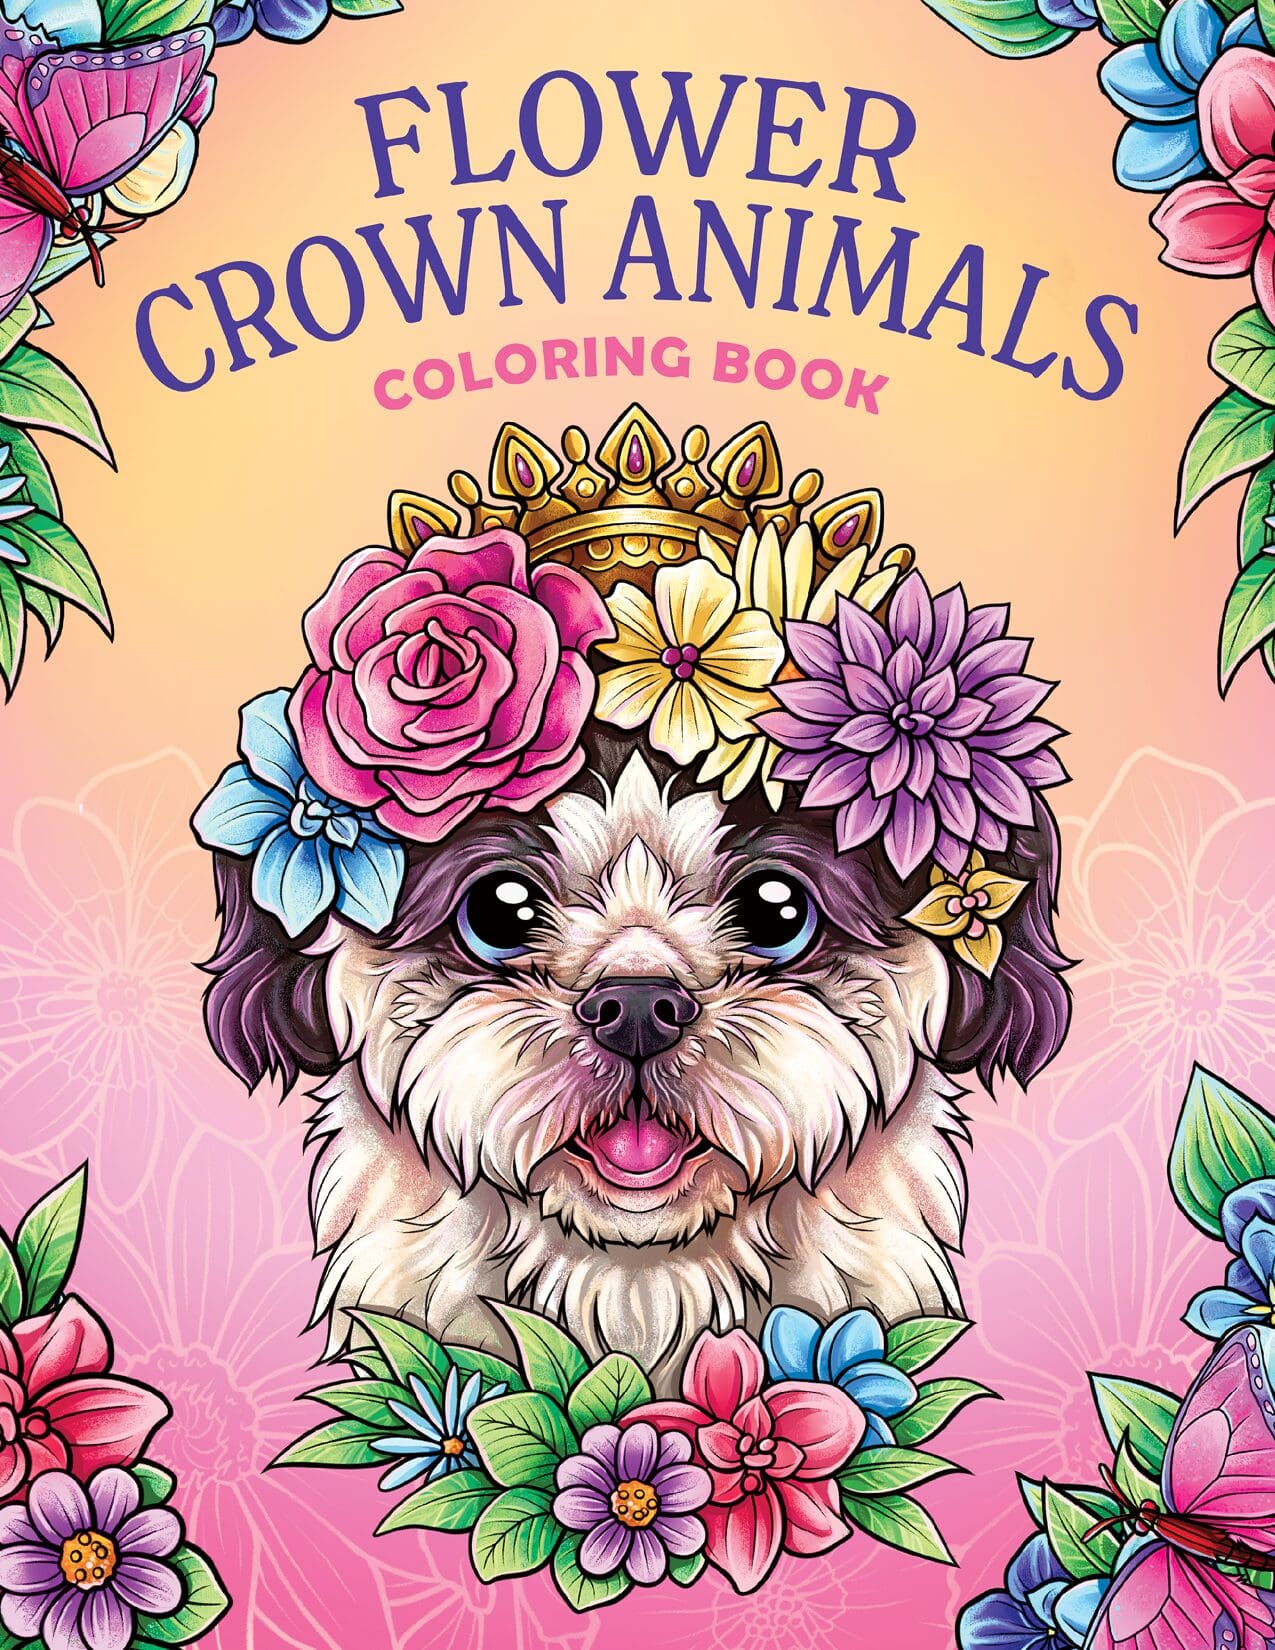 Royal Crowned Animals Coloring Book For Kids: Easy and Fun